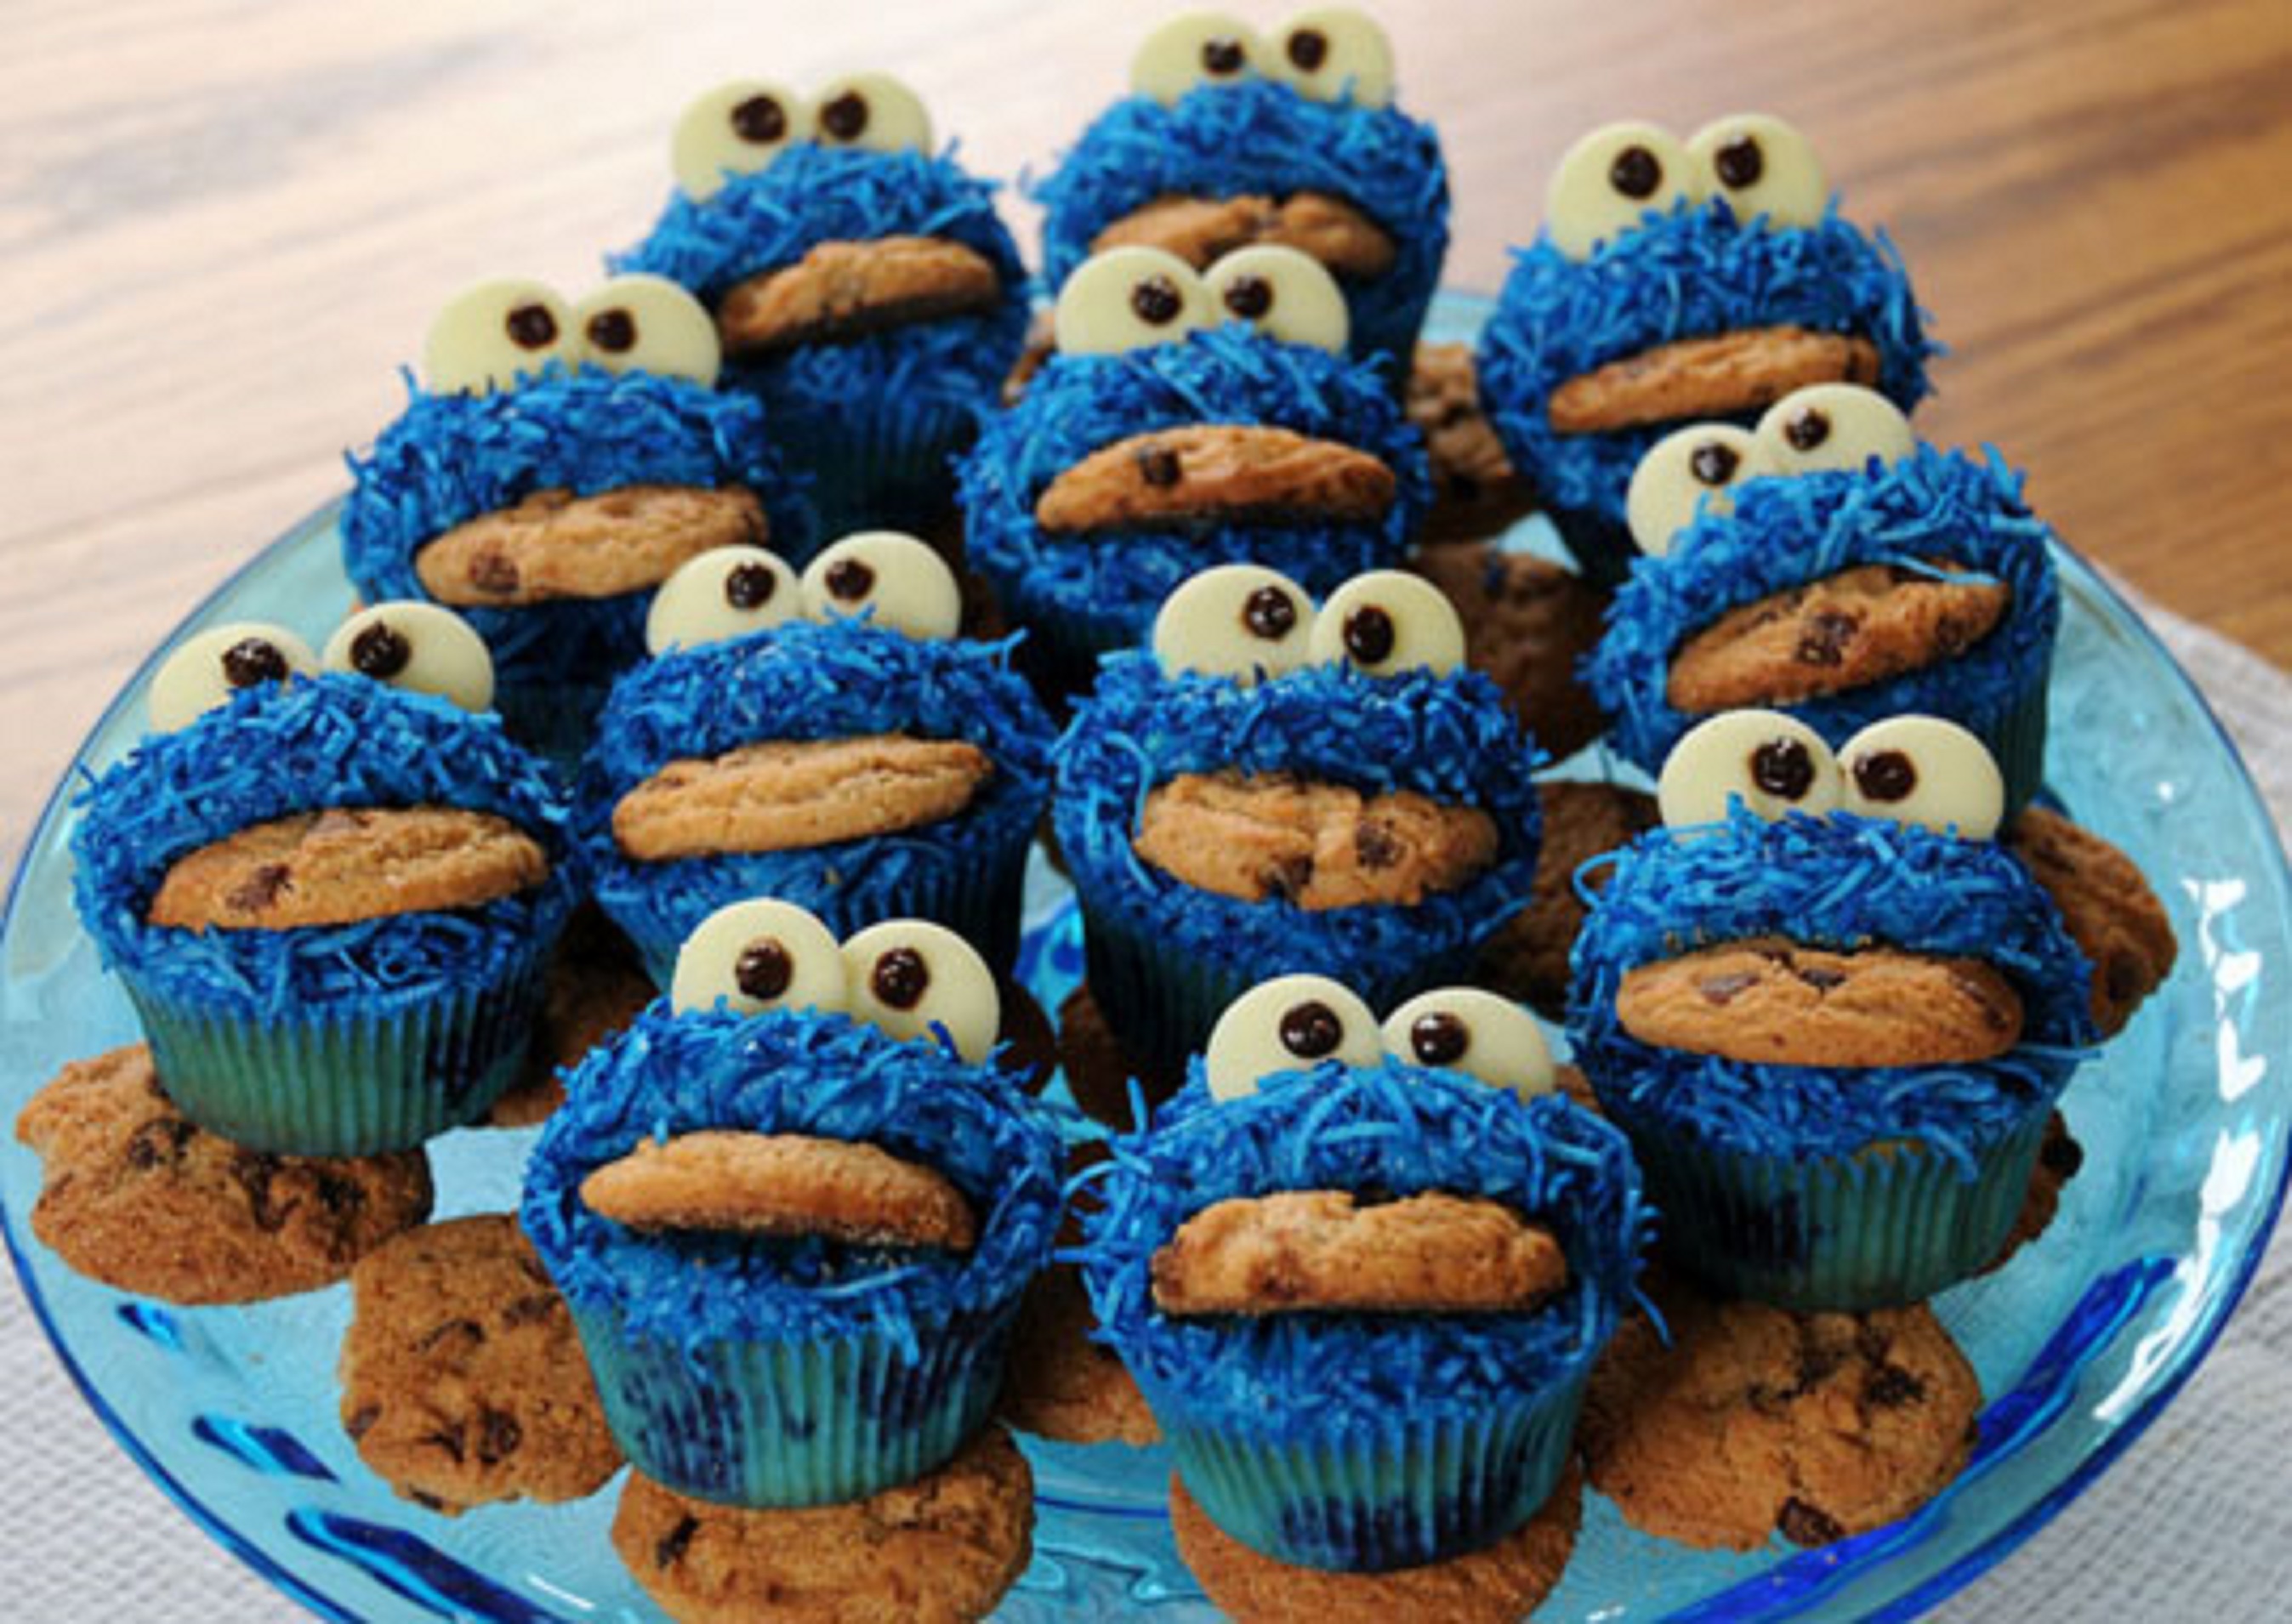 12 Awesome Cupcake Decorating Ideas - Cookie Monster Cupcakes